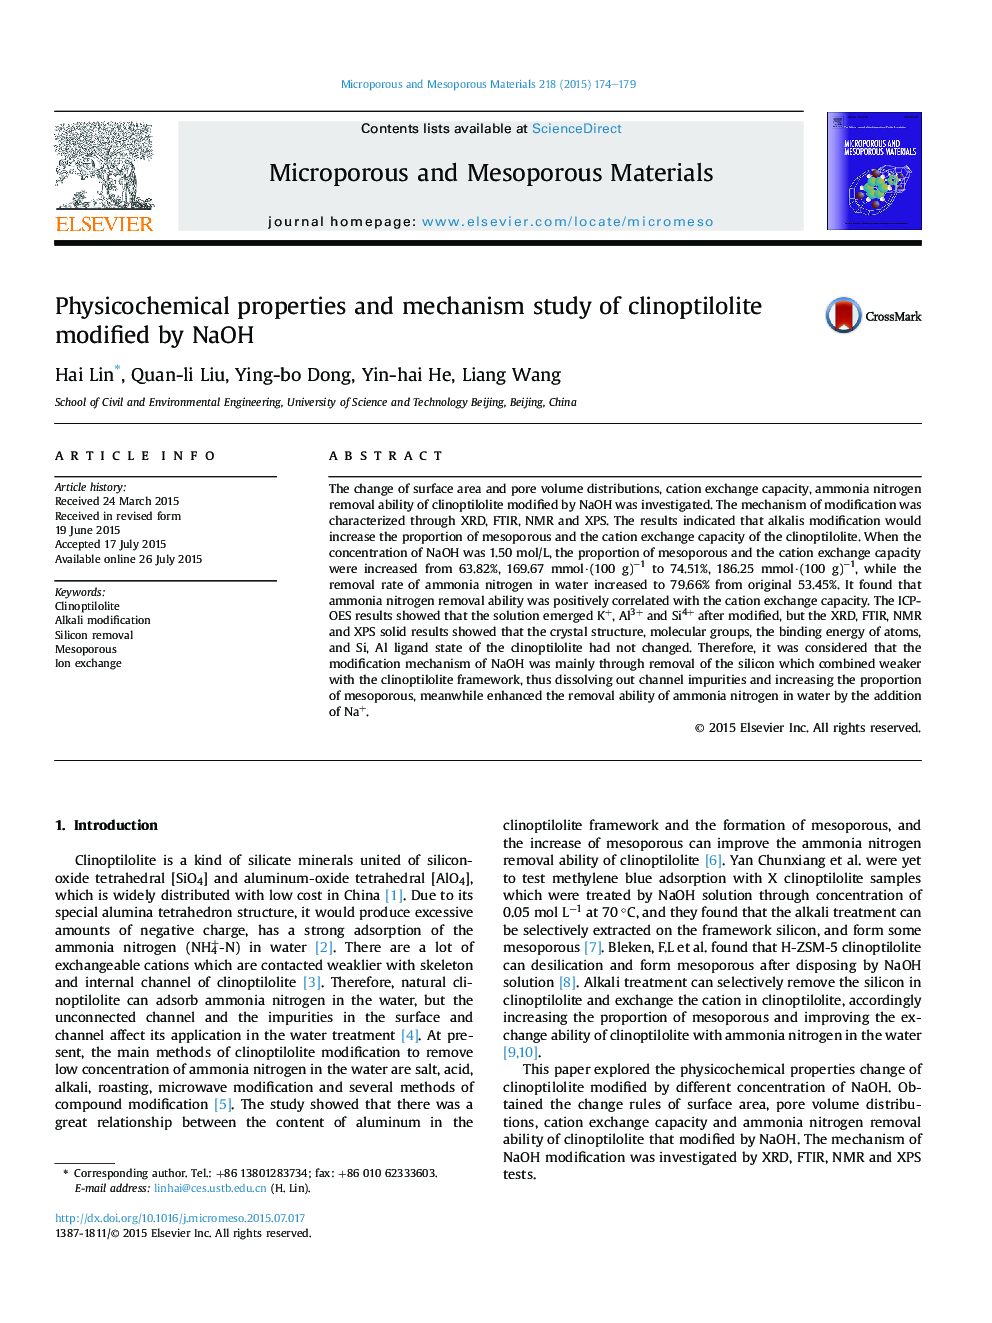 Physicochemical properties and mechanism study of clinoptilolite modified by NaOH